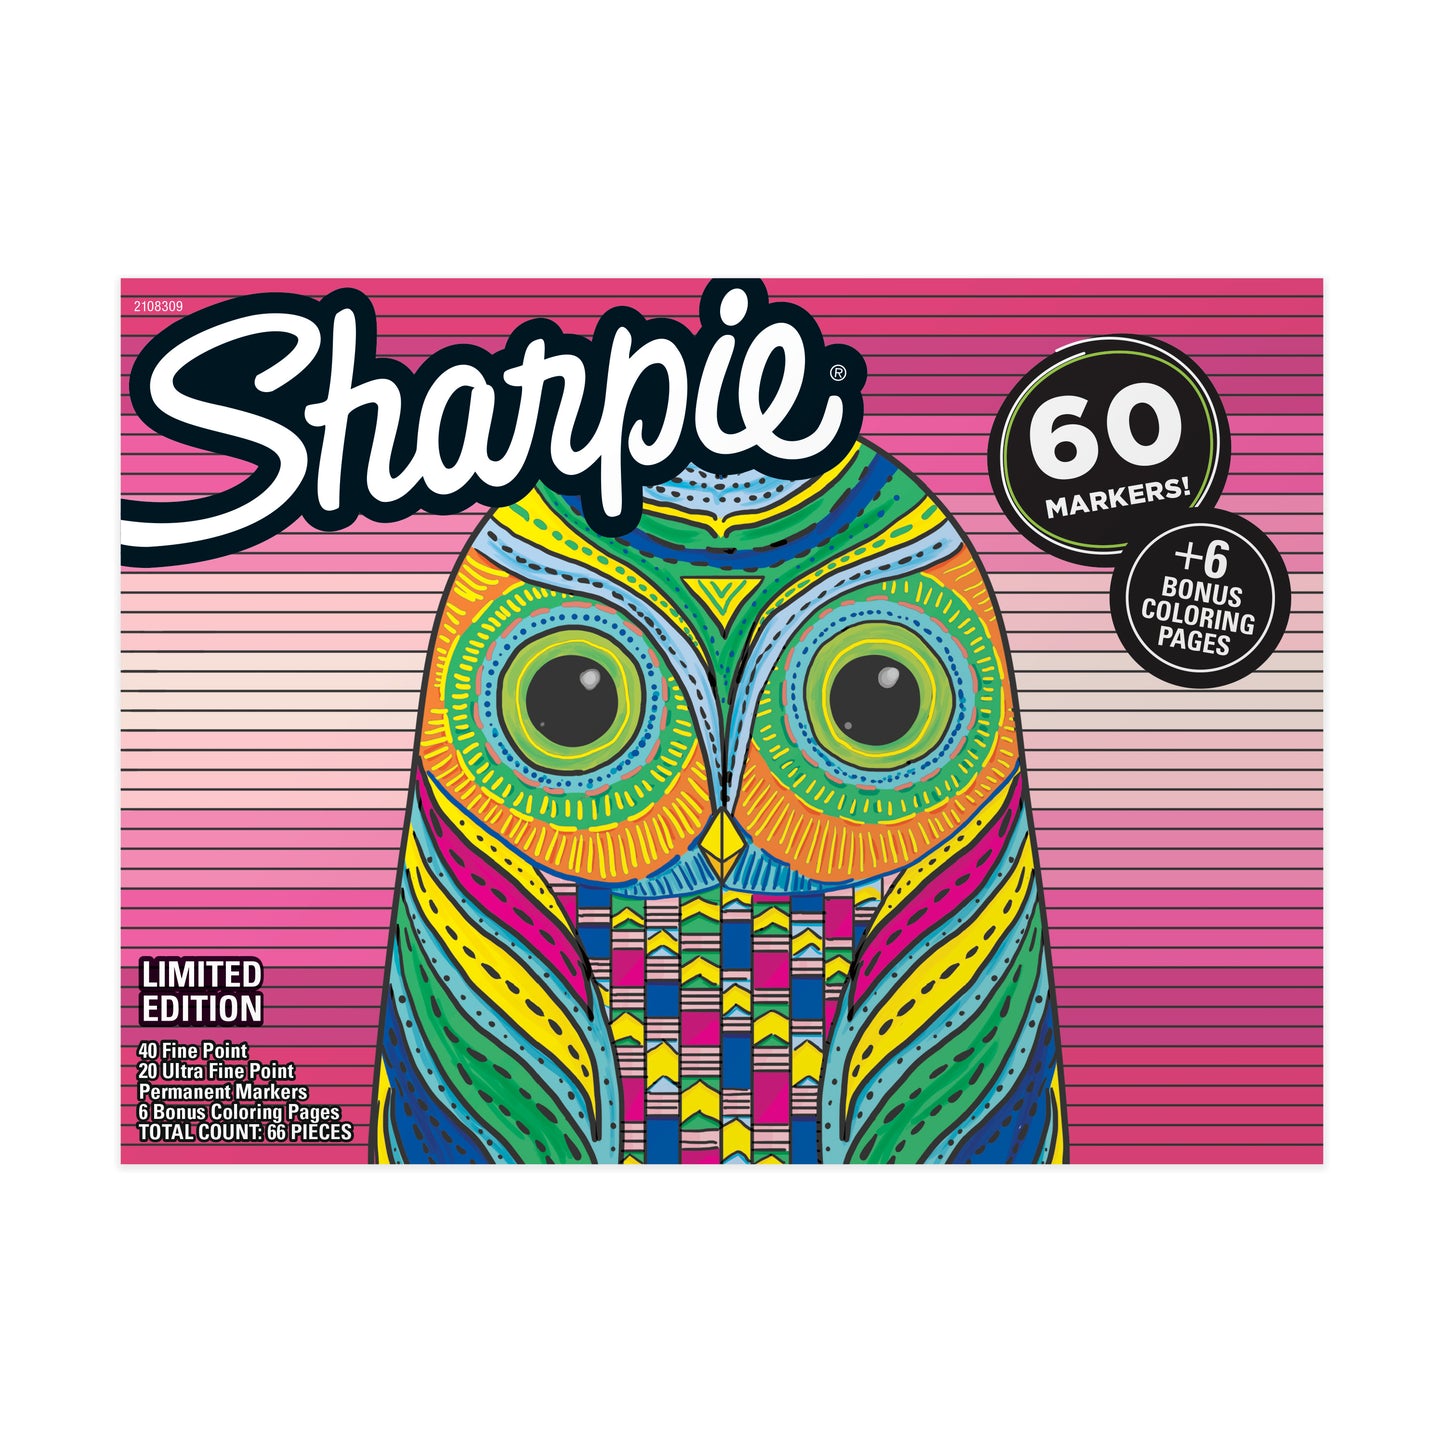 Sharpie Limited Edition Owl Box, 60CT